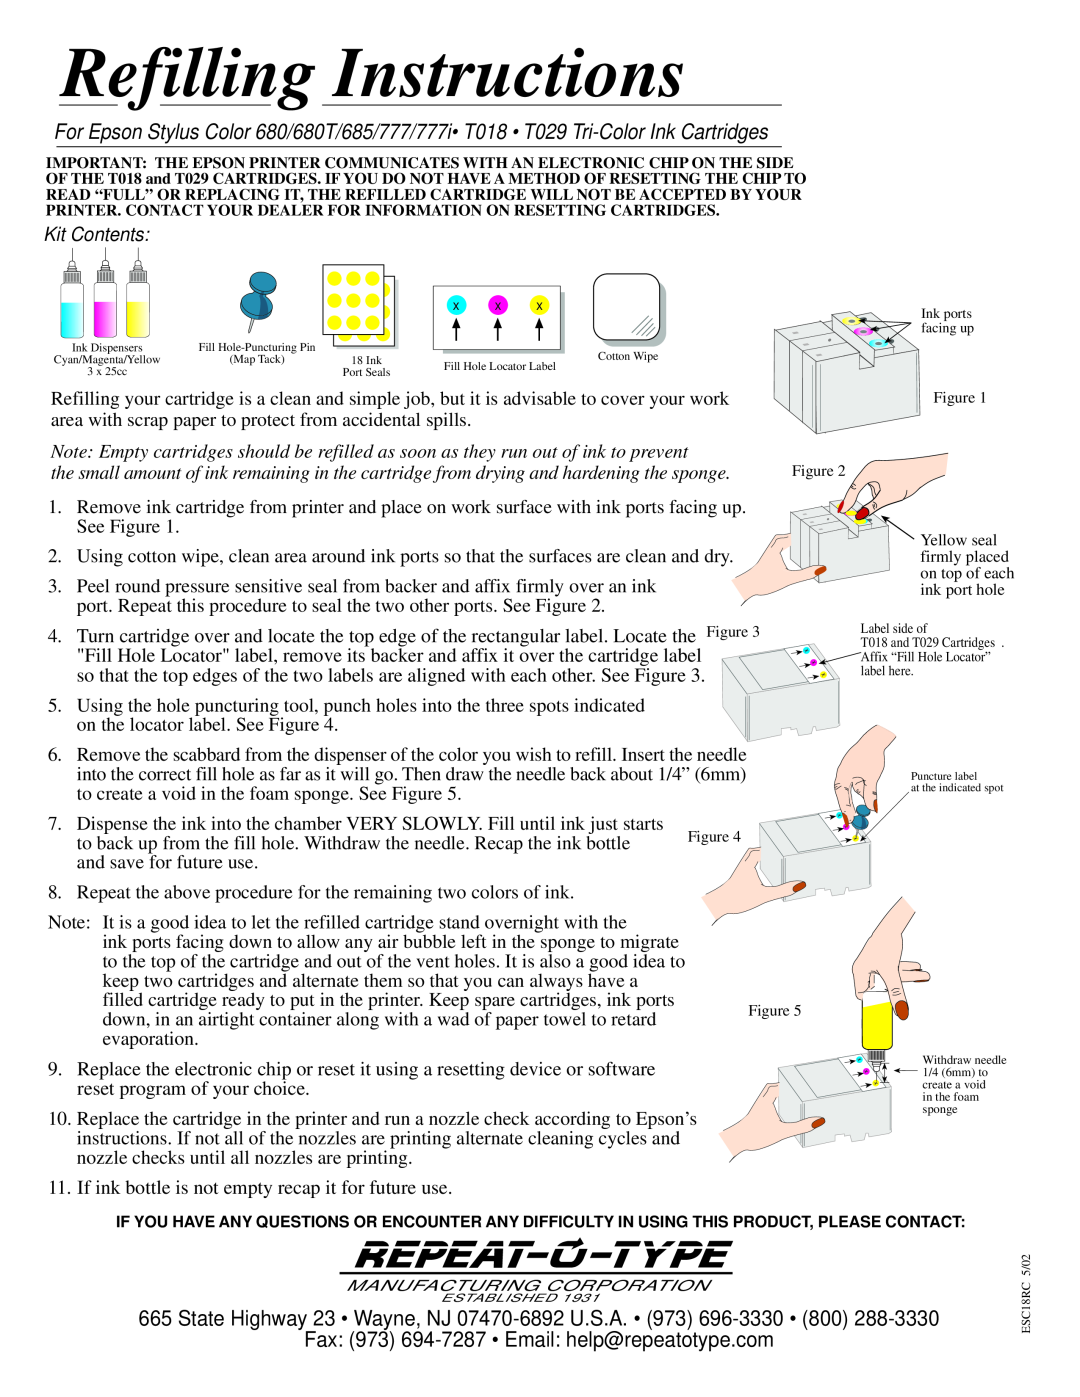 Epson Printer Accessories manual Refilling Instructions, State Highway 23 Wayne, NJ 07470-6892 U.S.A, Kit Contents 